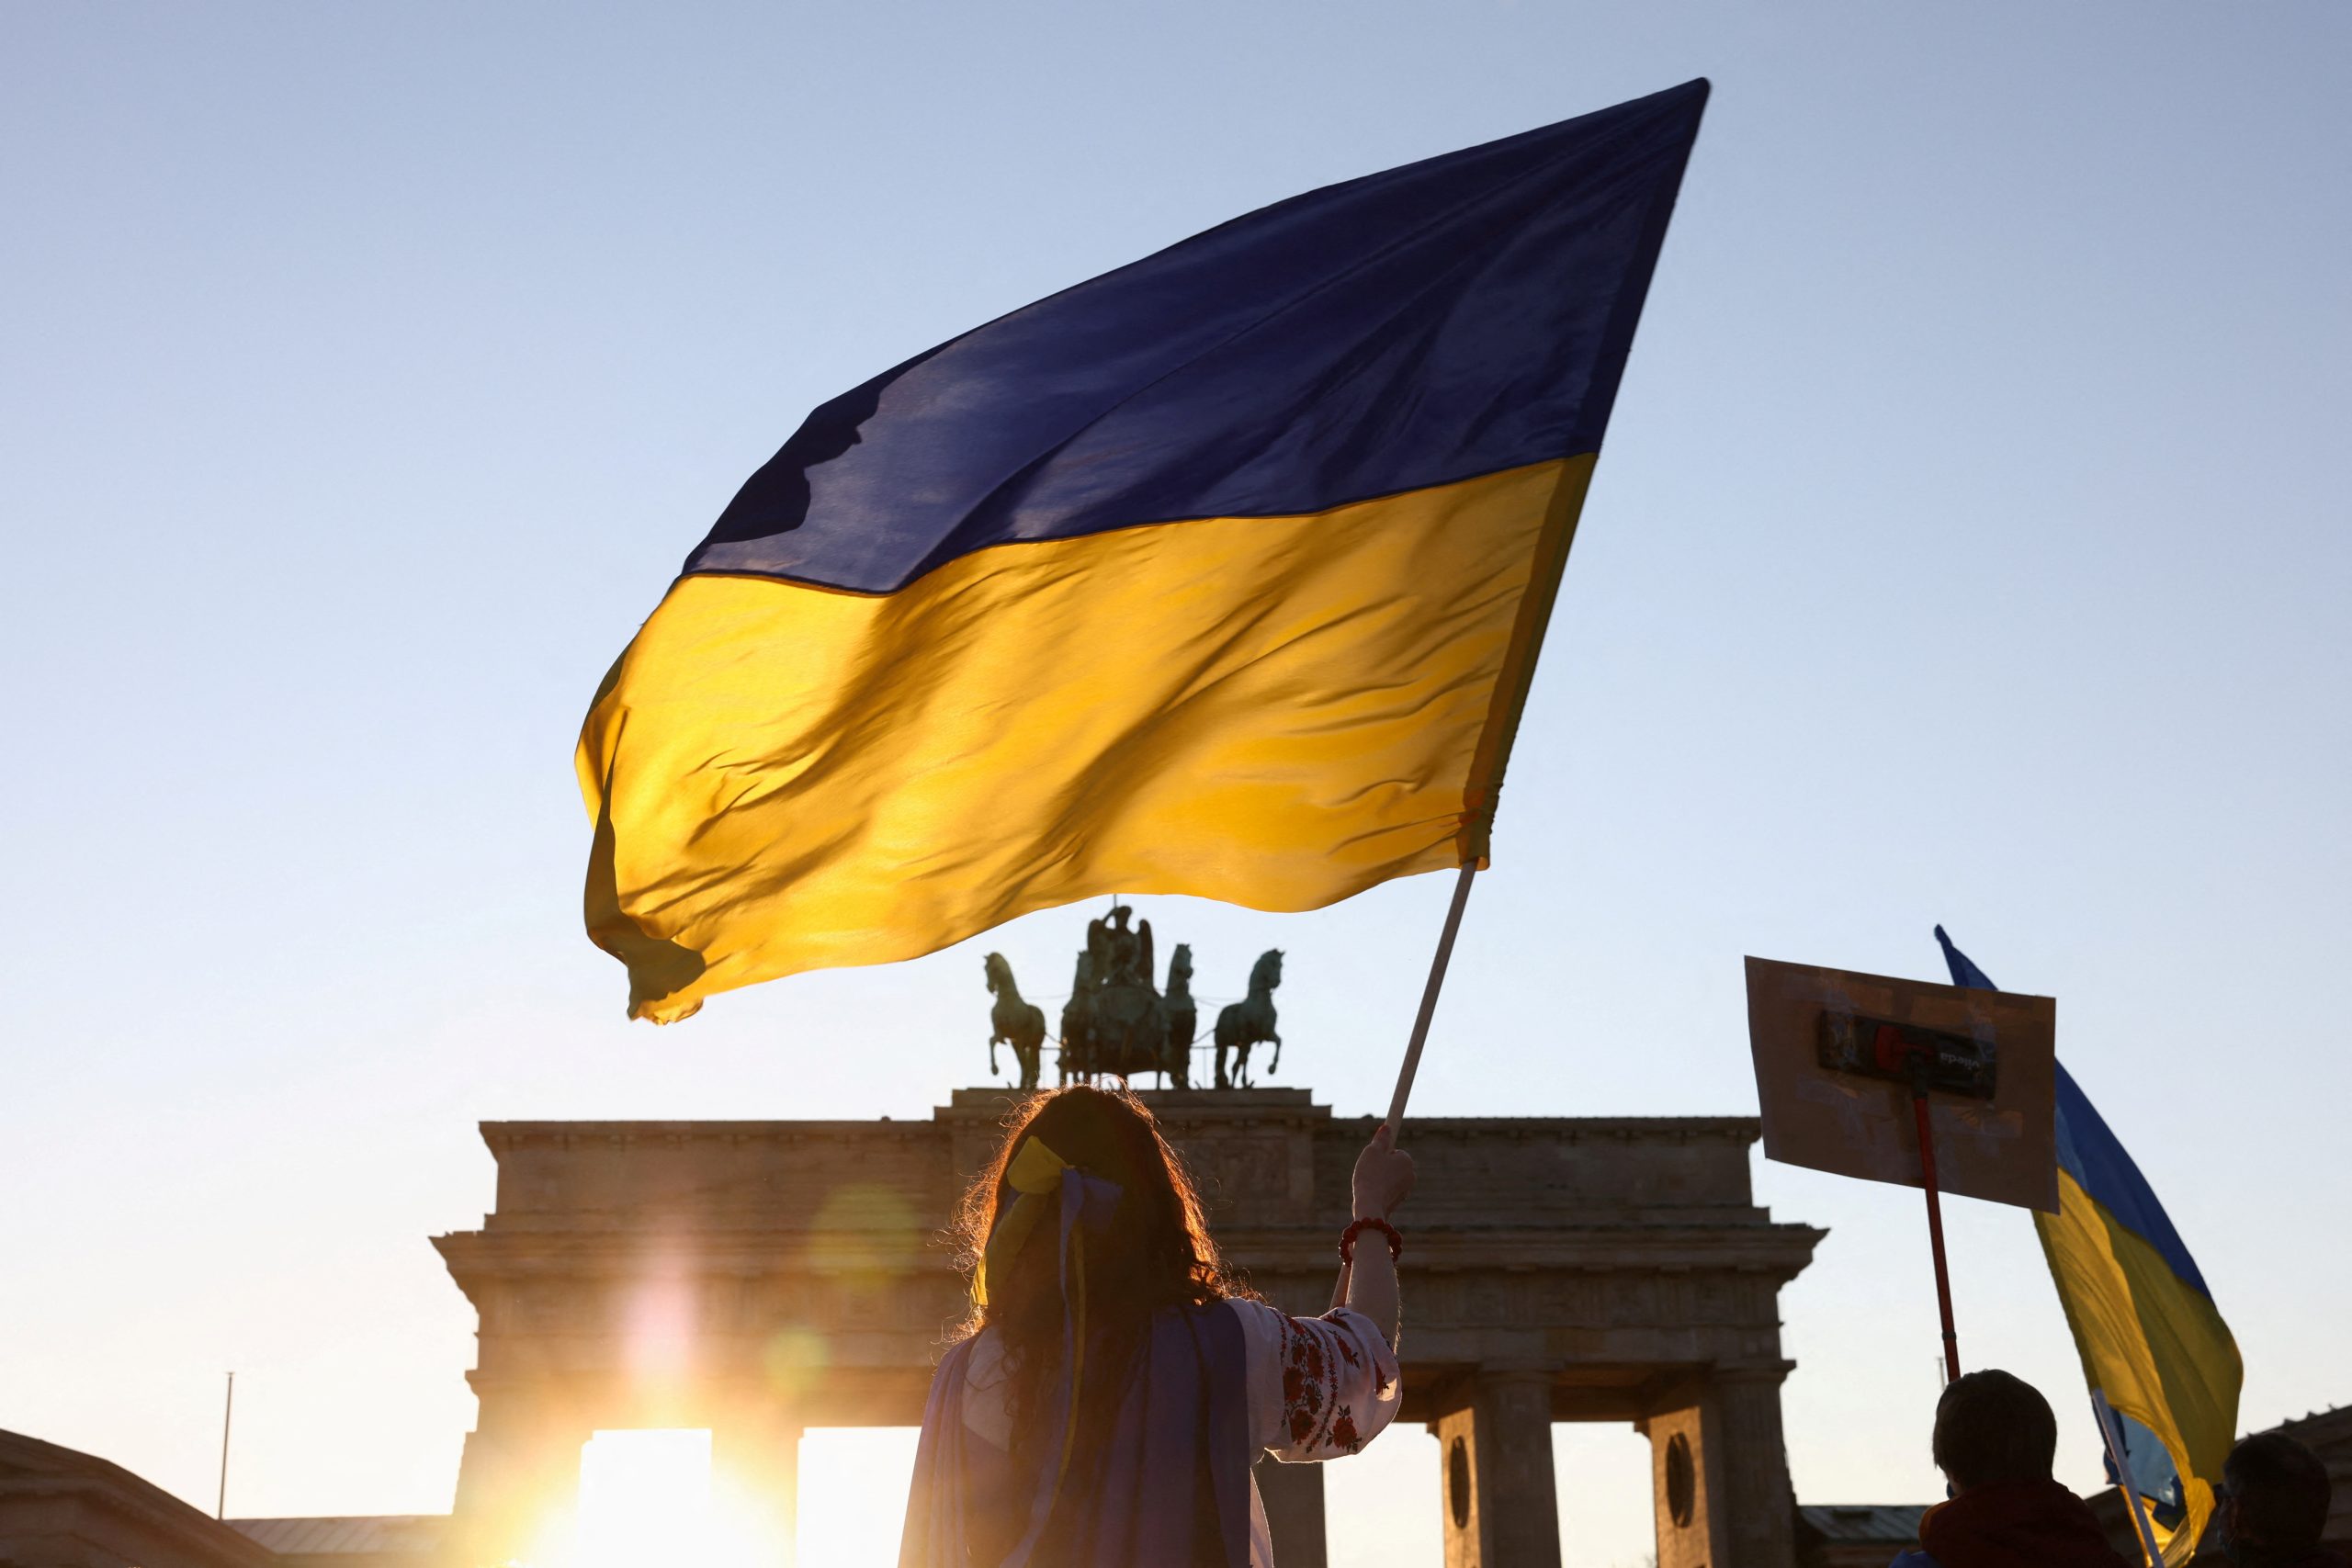 Photo: A person holds a Ukrainian flag during an anti-war demonstration "Stop the War. Peace and Solidarity for the People in Ukraine" against Russia's invasion of Ukraine, next to the Brandenburg Gate in Berlin, Germany, March 13, 2022. Credit: REUTERS/Christian Mang